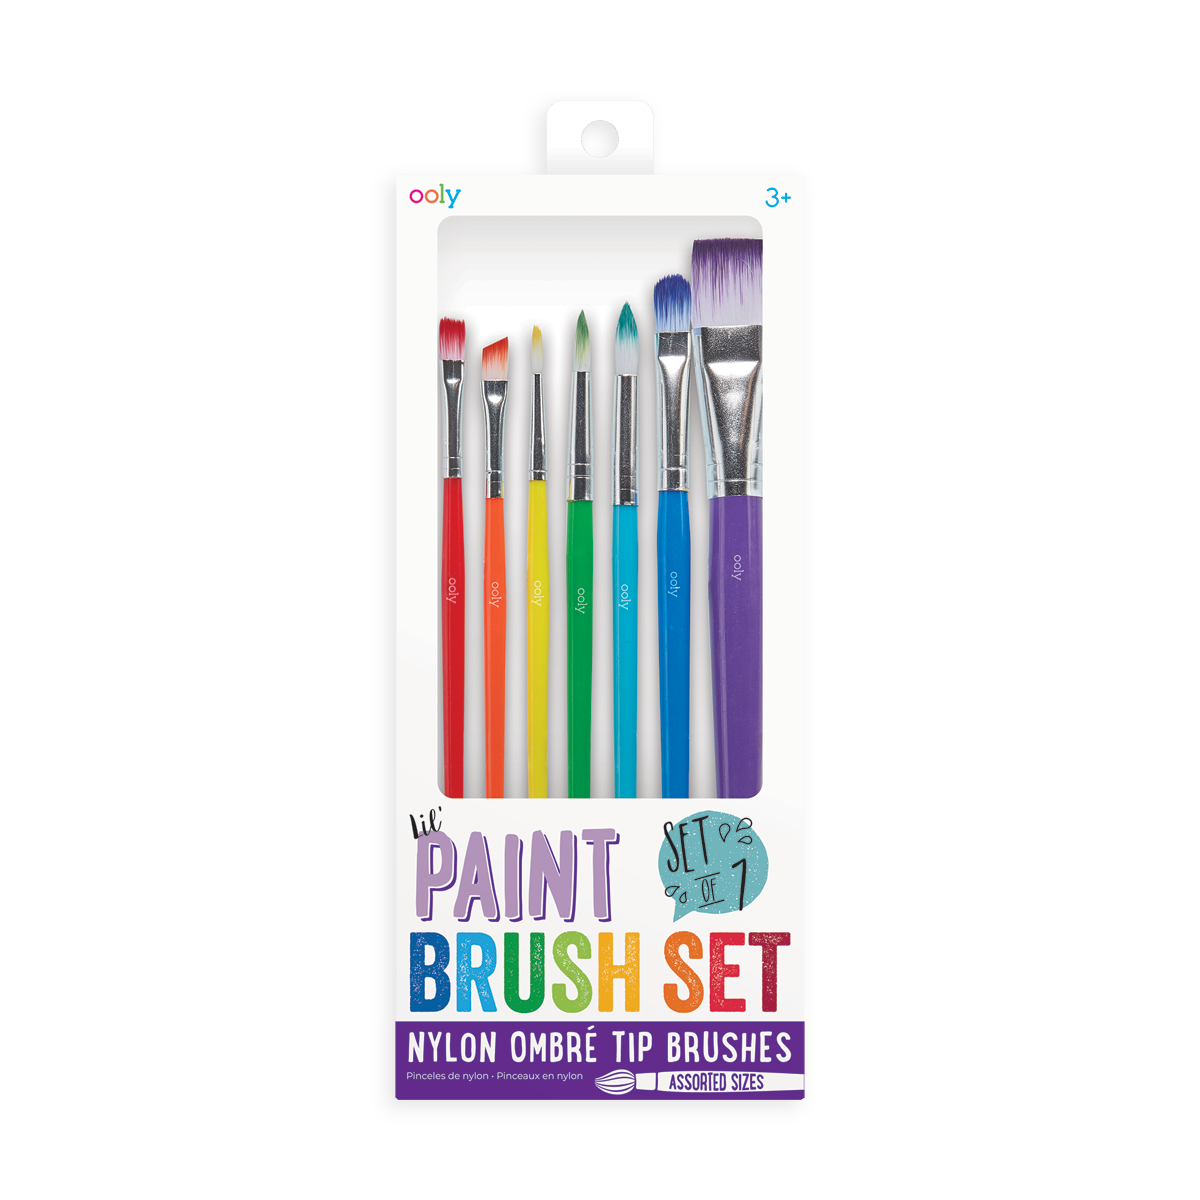 How to Clean Paintbrushes: How to Safely Clean, Store and Transport Your  Paint Brushes — Art is Fun